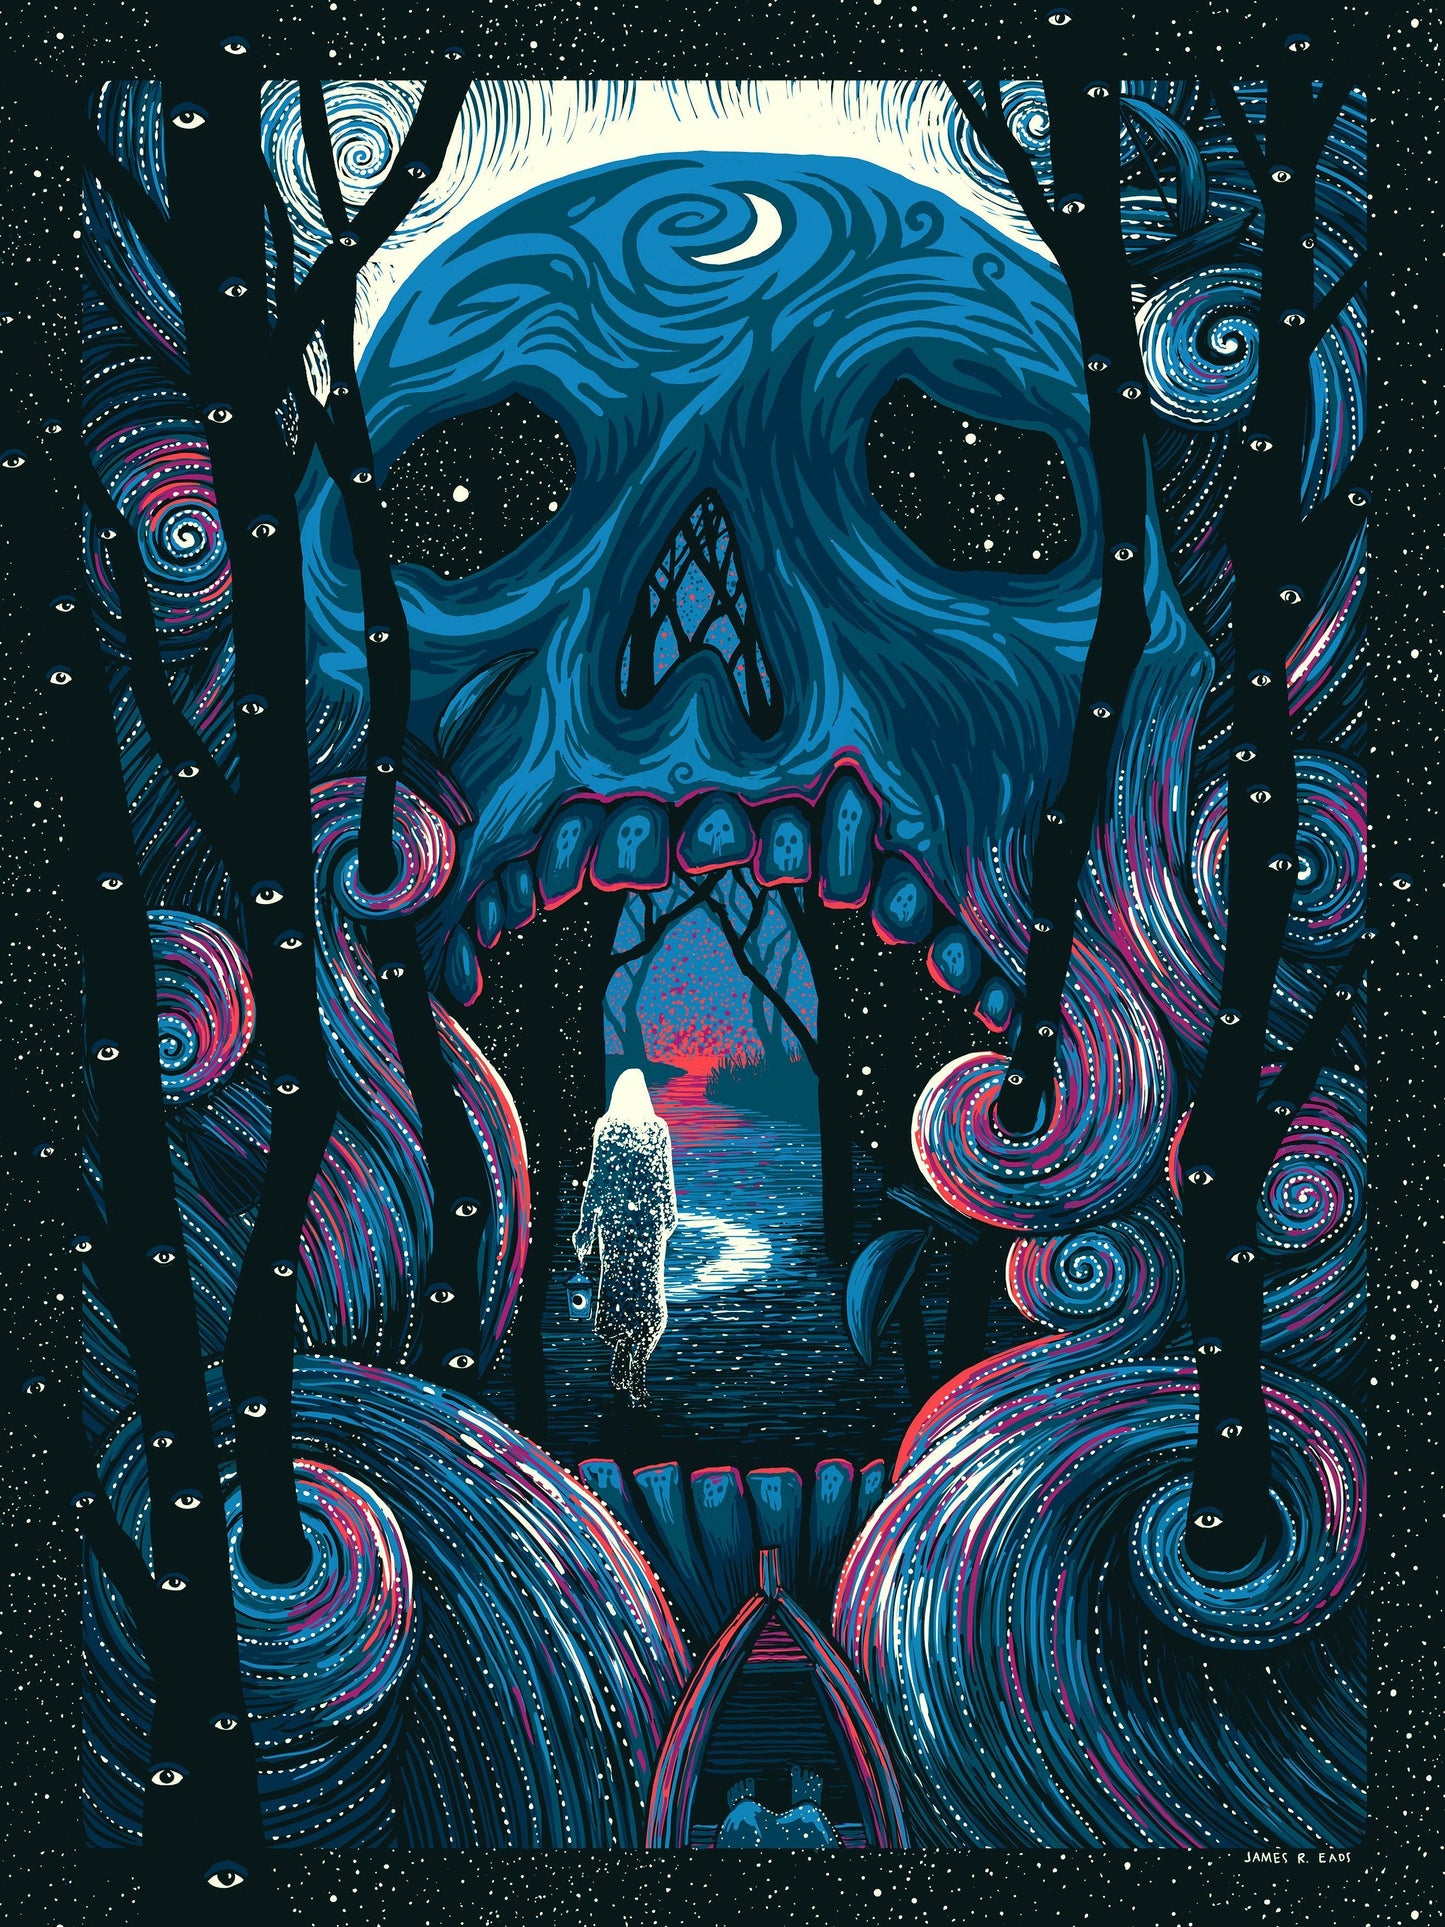 Unthought Known (Cougar White Edition) James R. Eads 